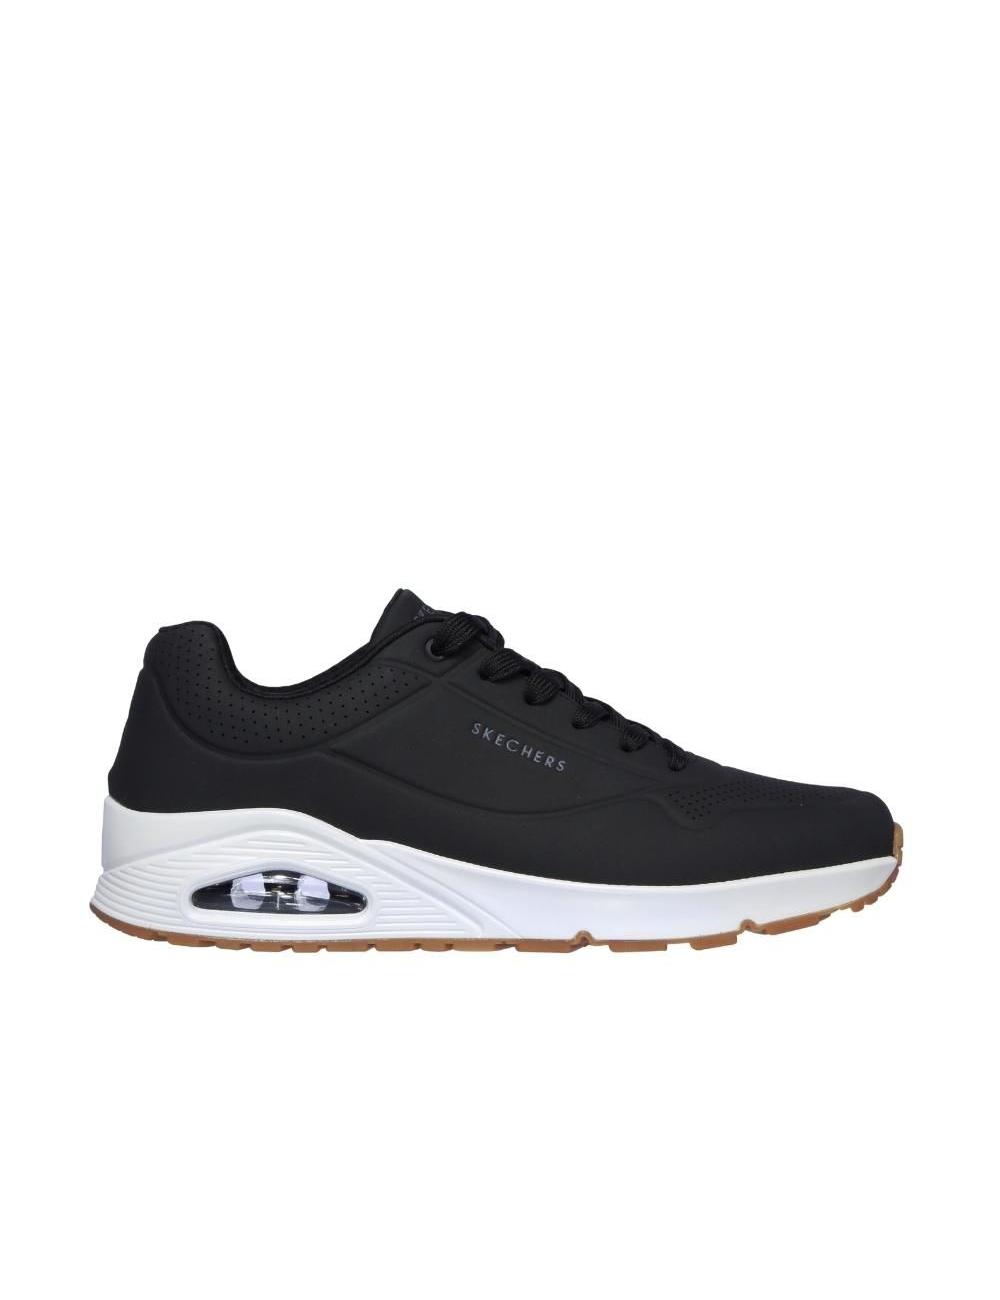 SKECHERS UNO - STAND ON AIR BLK HOMBRE